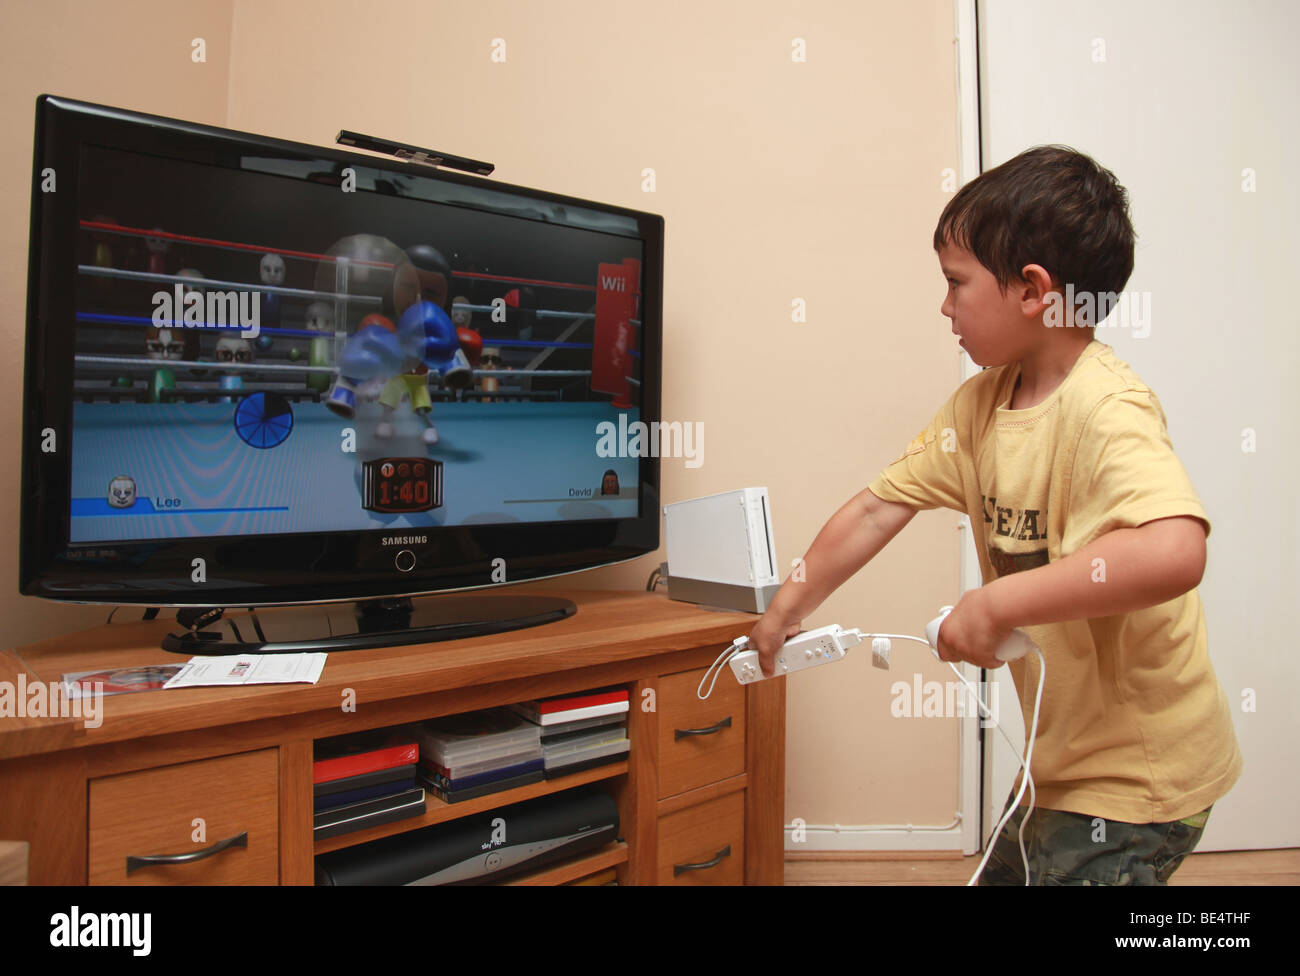 27 Best Nintendo Wii Games For Kids Of All Times!